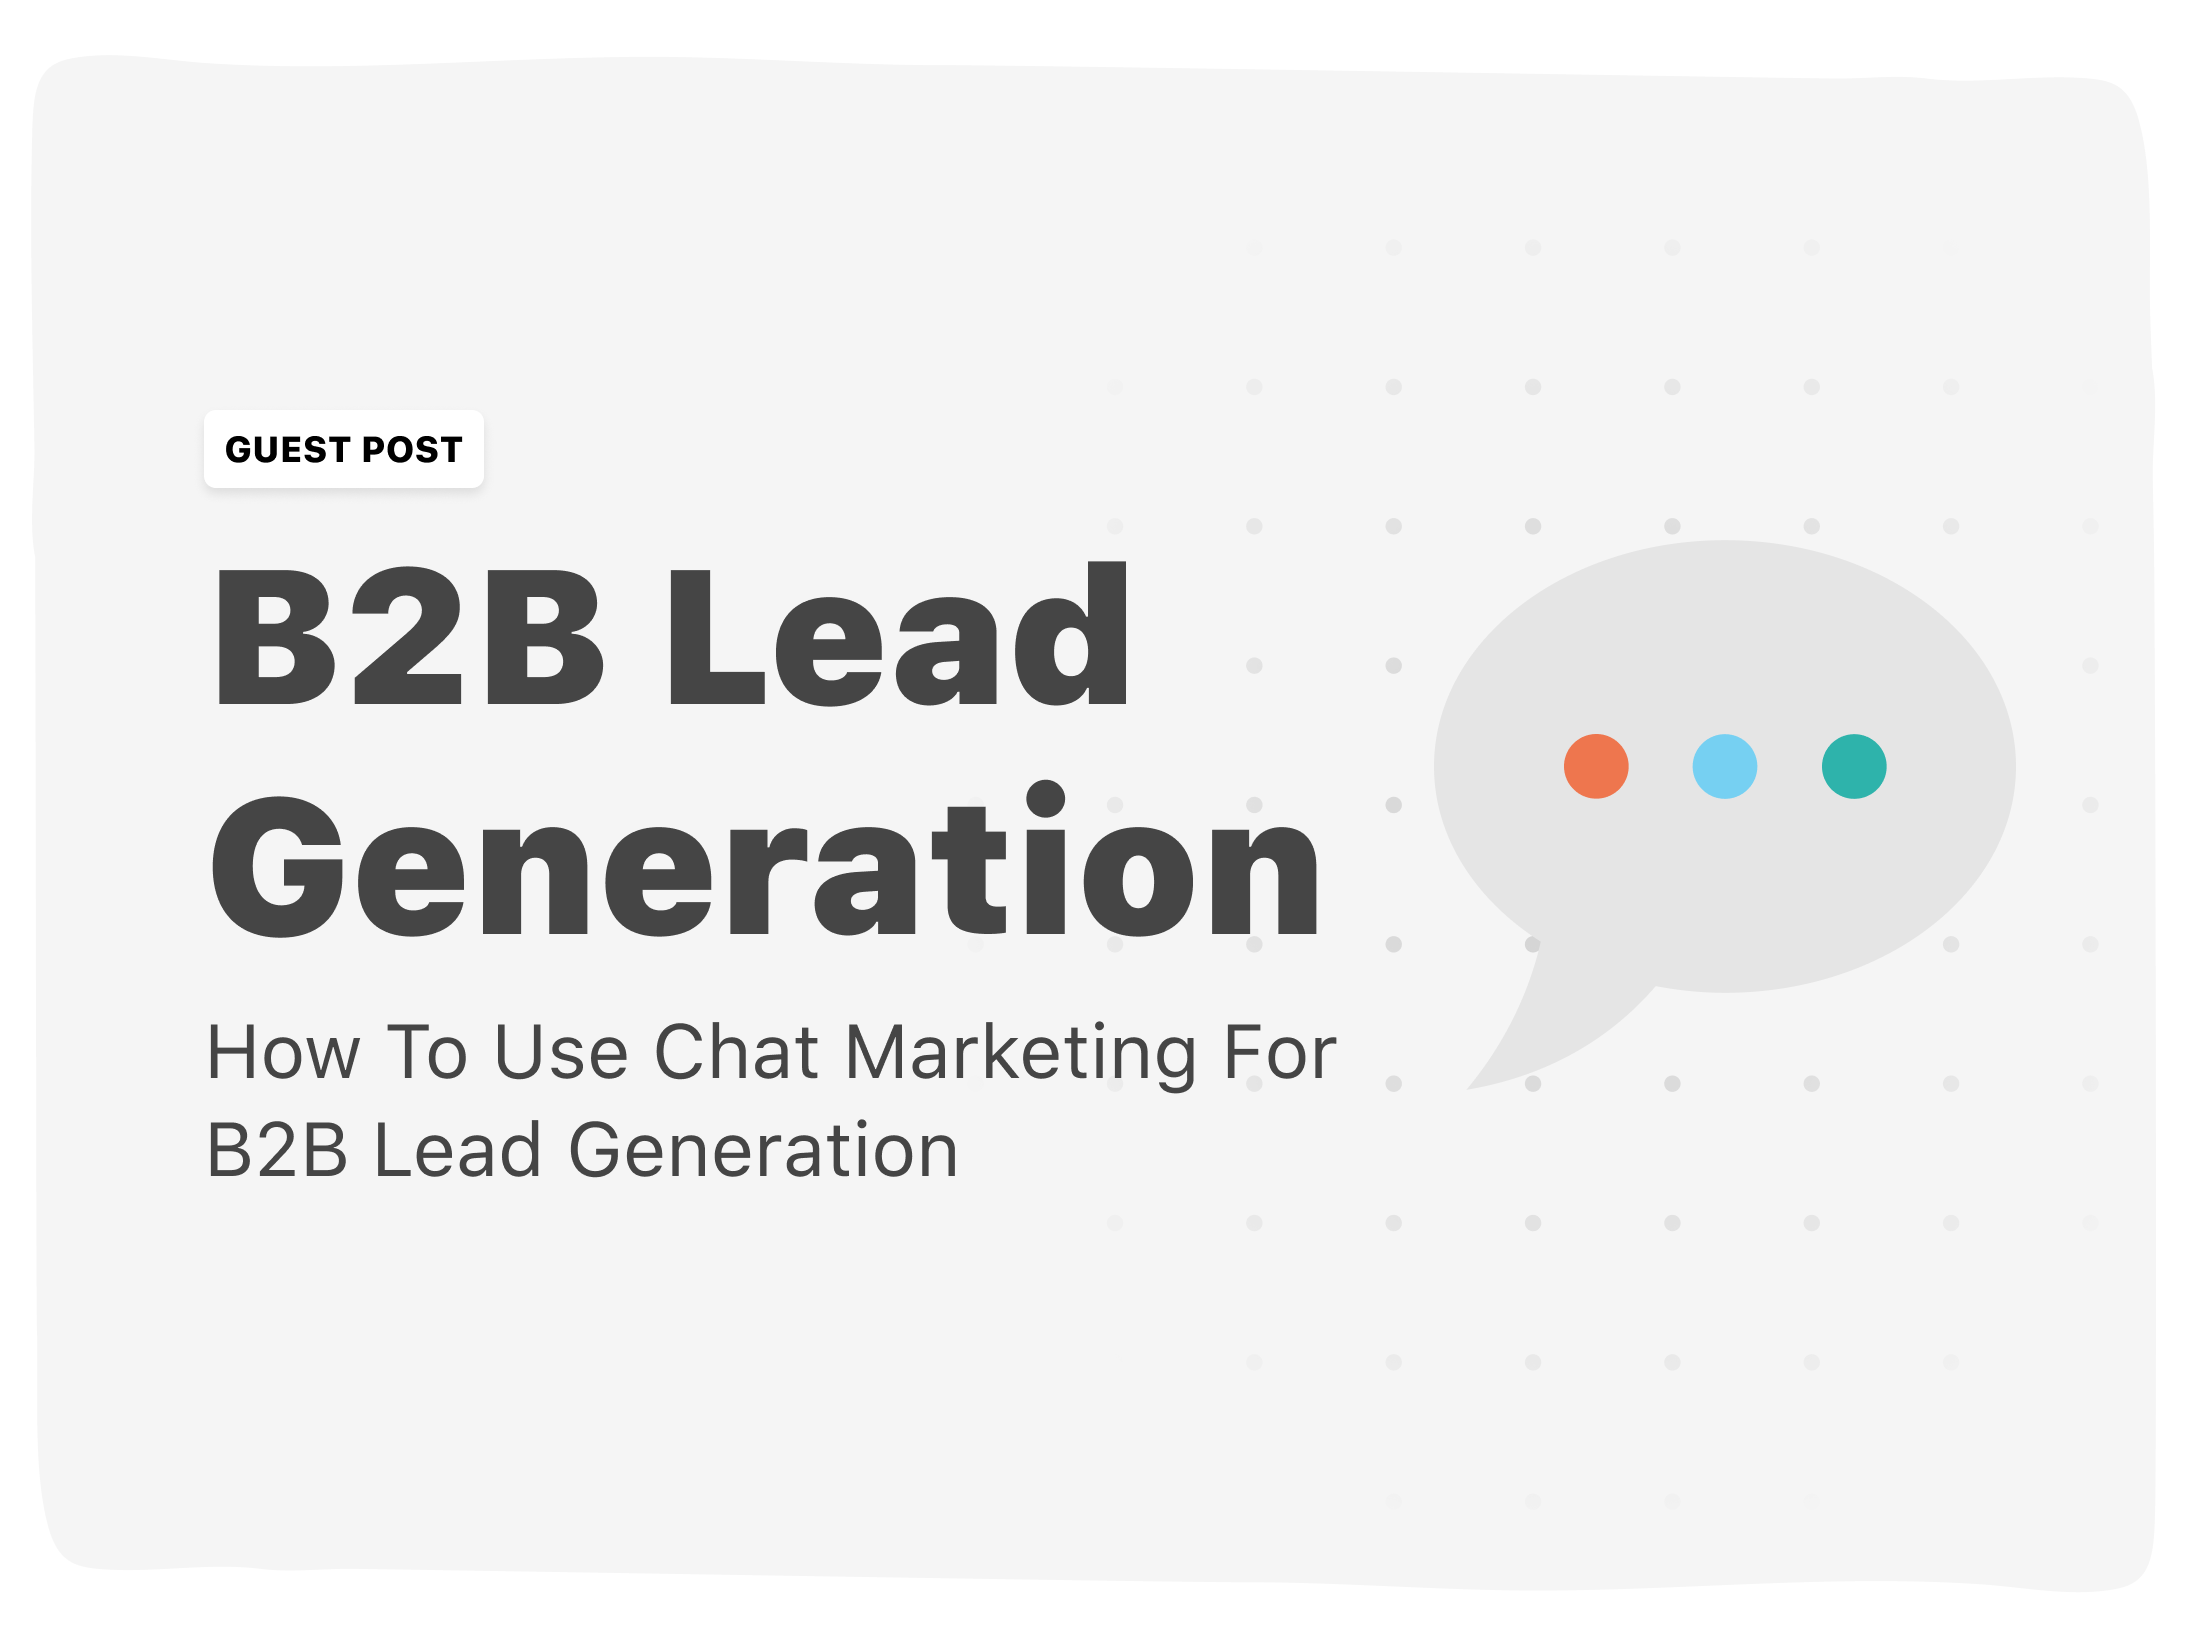 How To Use Chat Marketing For B2B Lead Generation